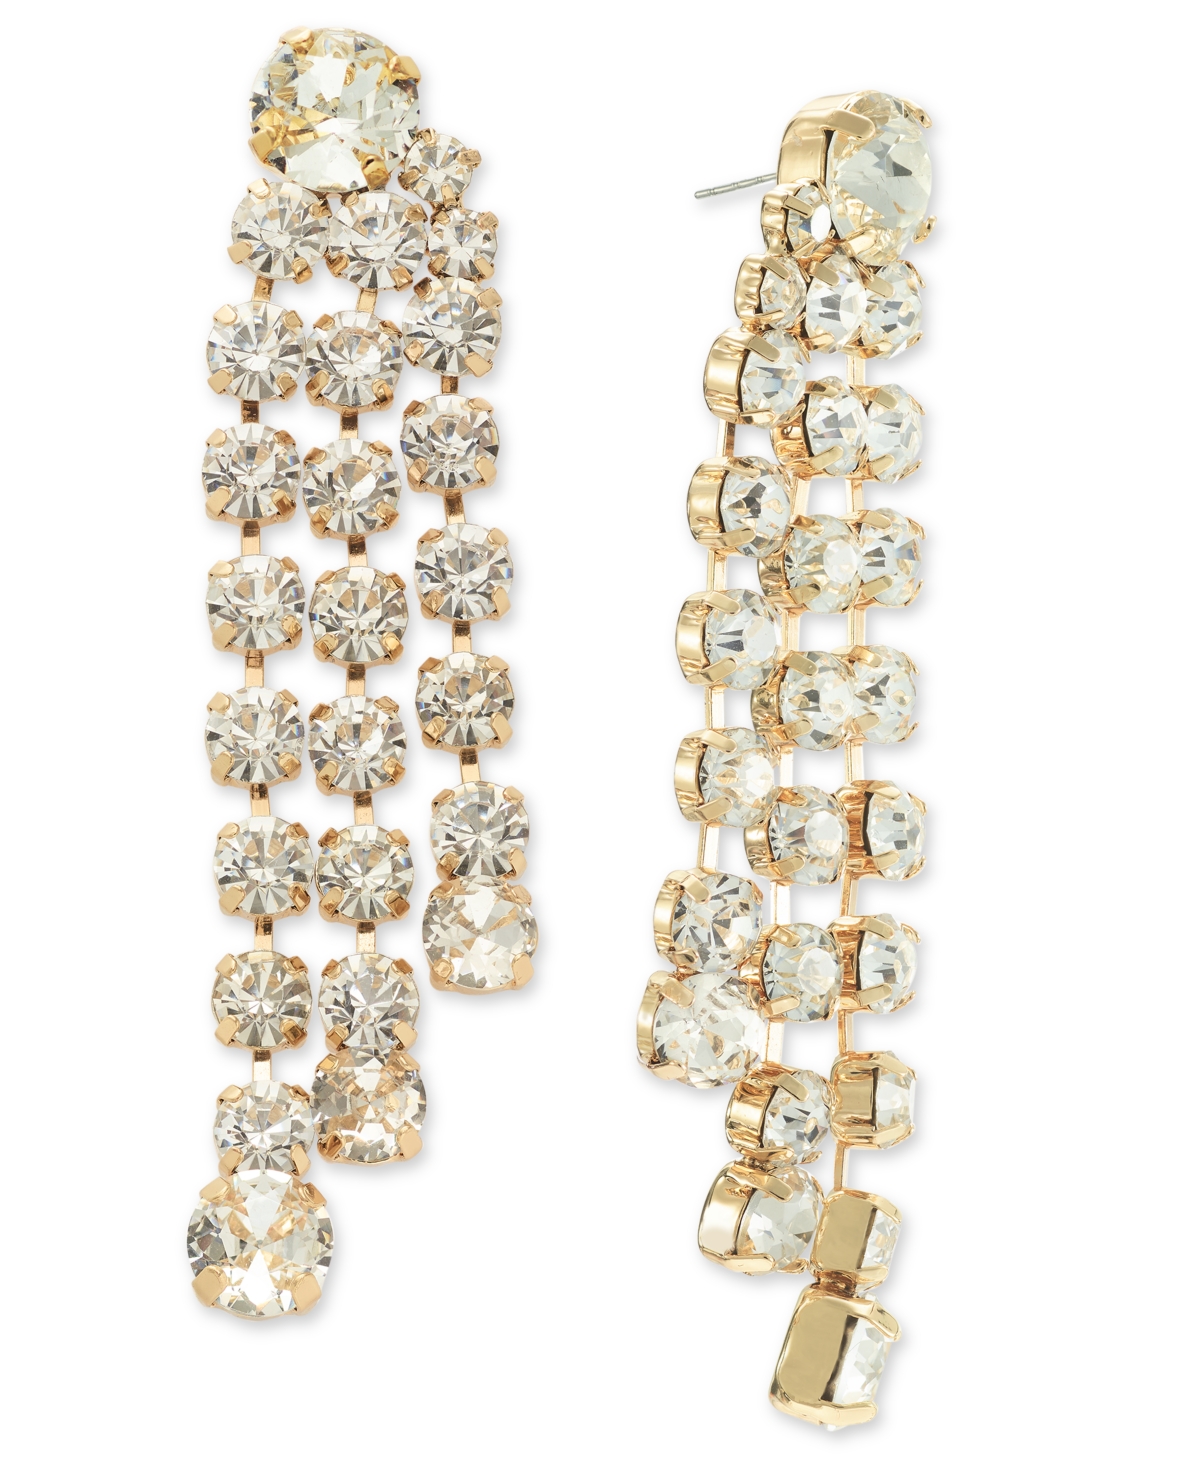 Gold-Tone Crystal Layered Drop Earrings, Created for Macy's - Gold